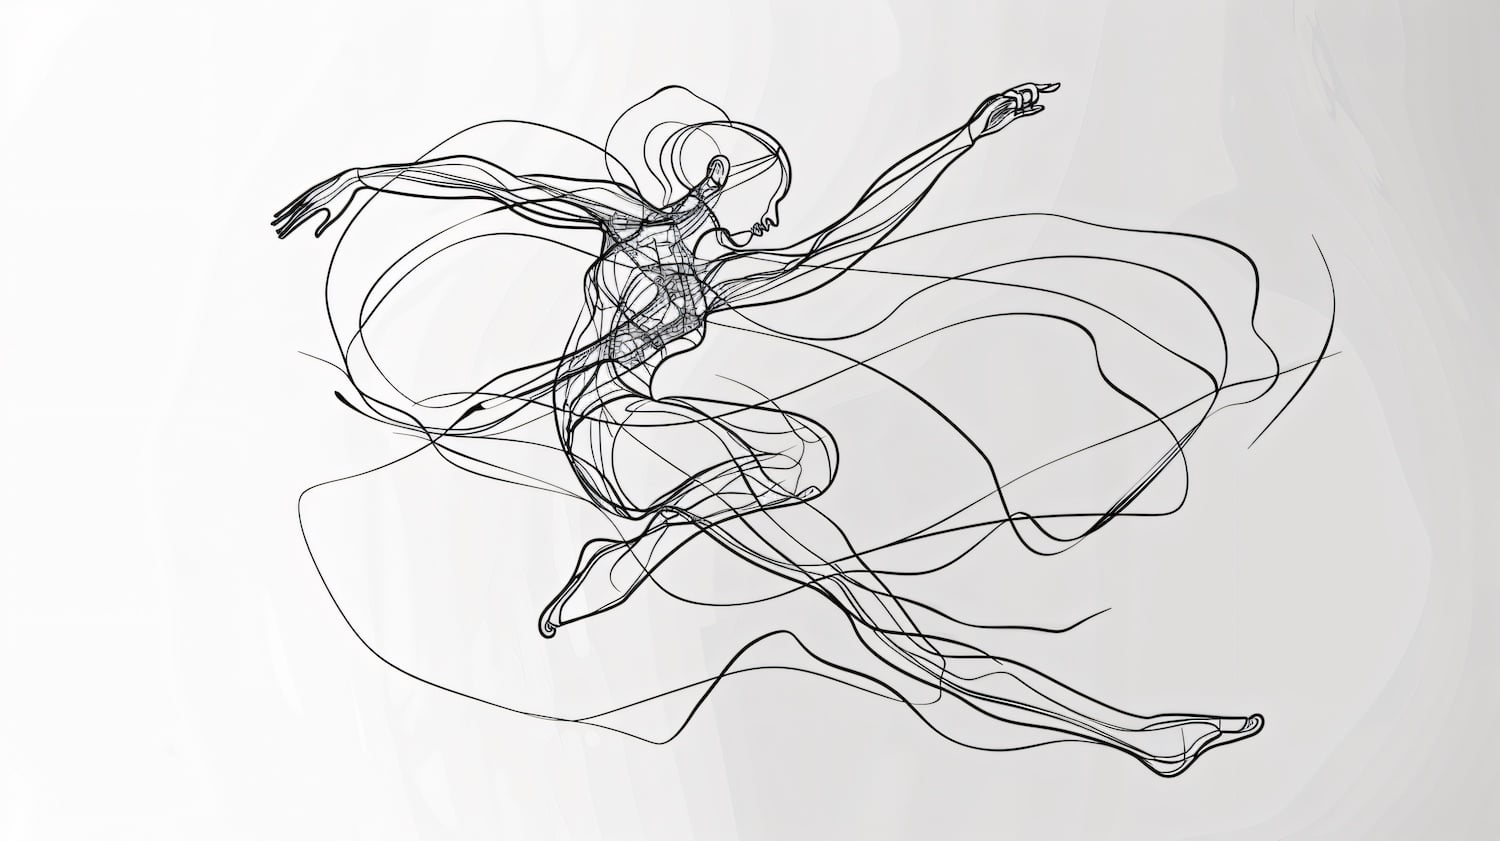 A minimalist black and white line drawing of a dancer in motion